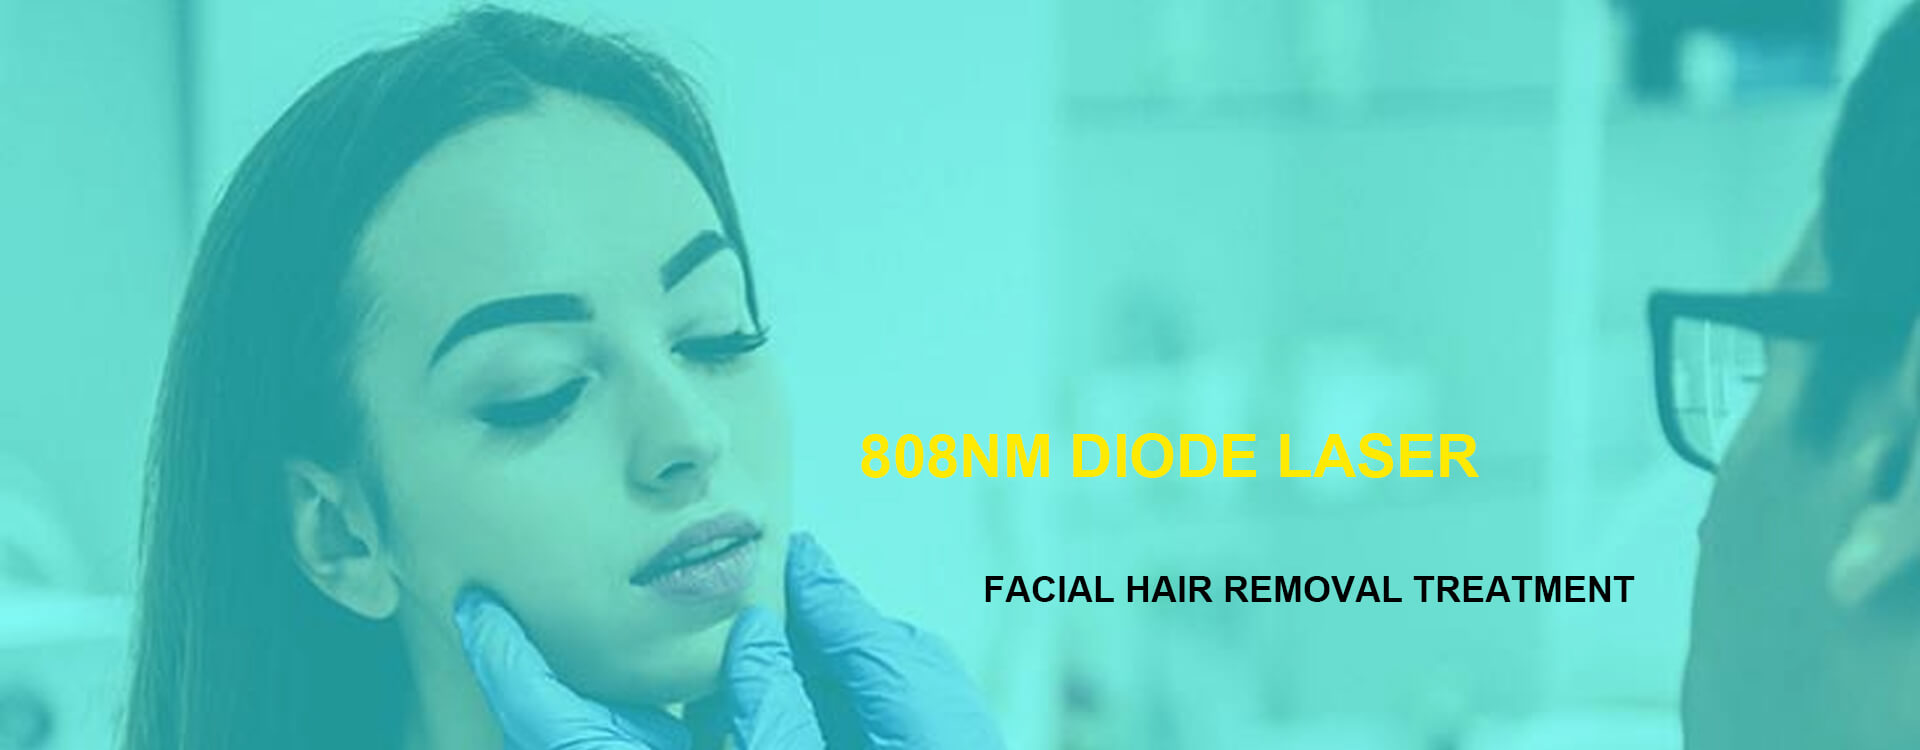 How To Remove Facial Hair With Laser Hair Removal Machine?